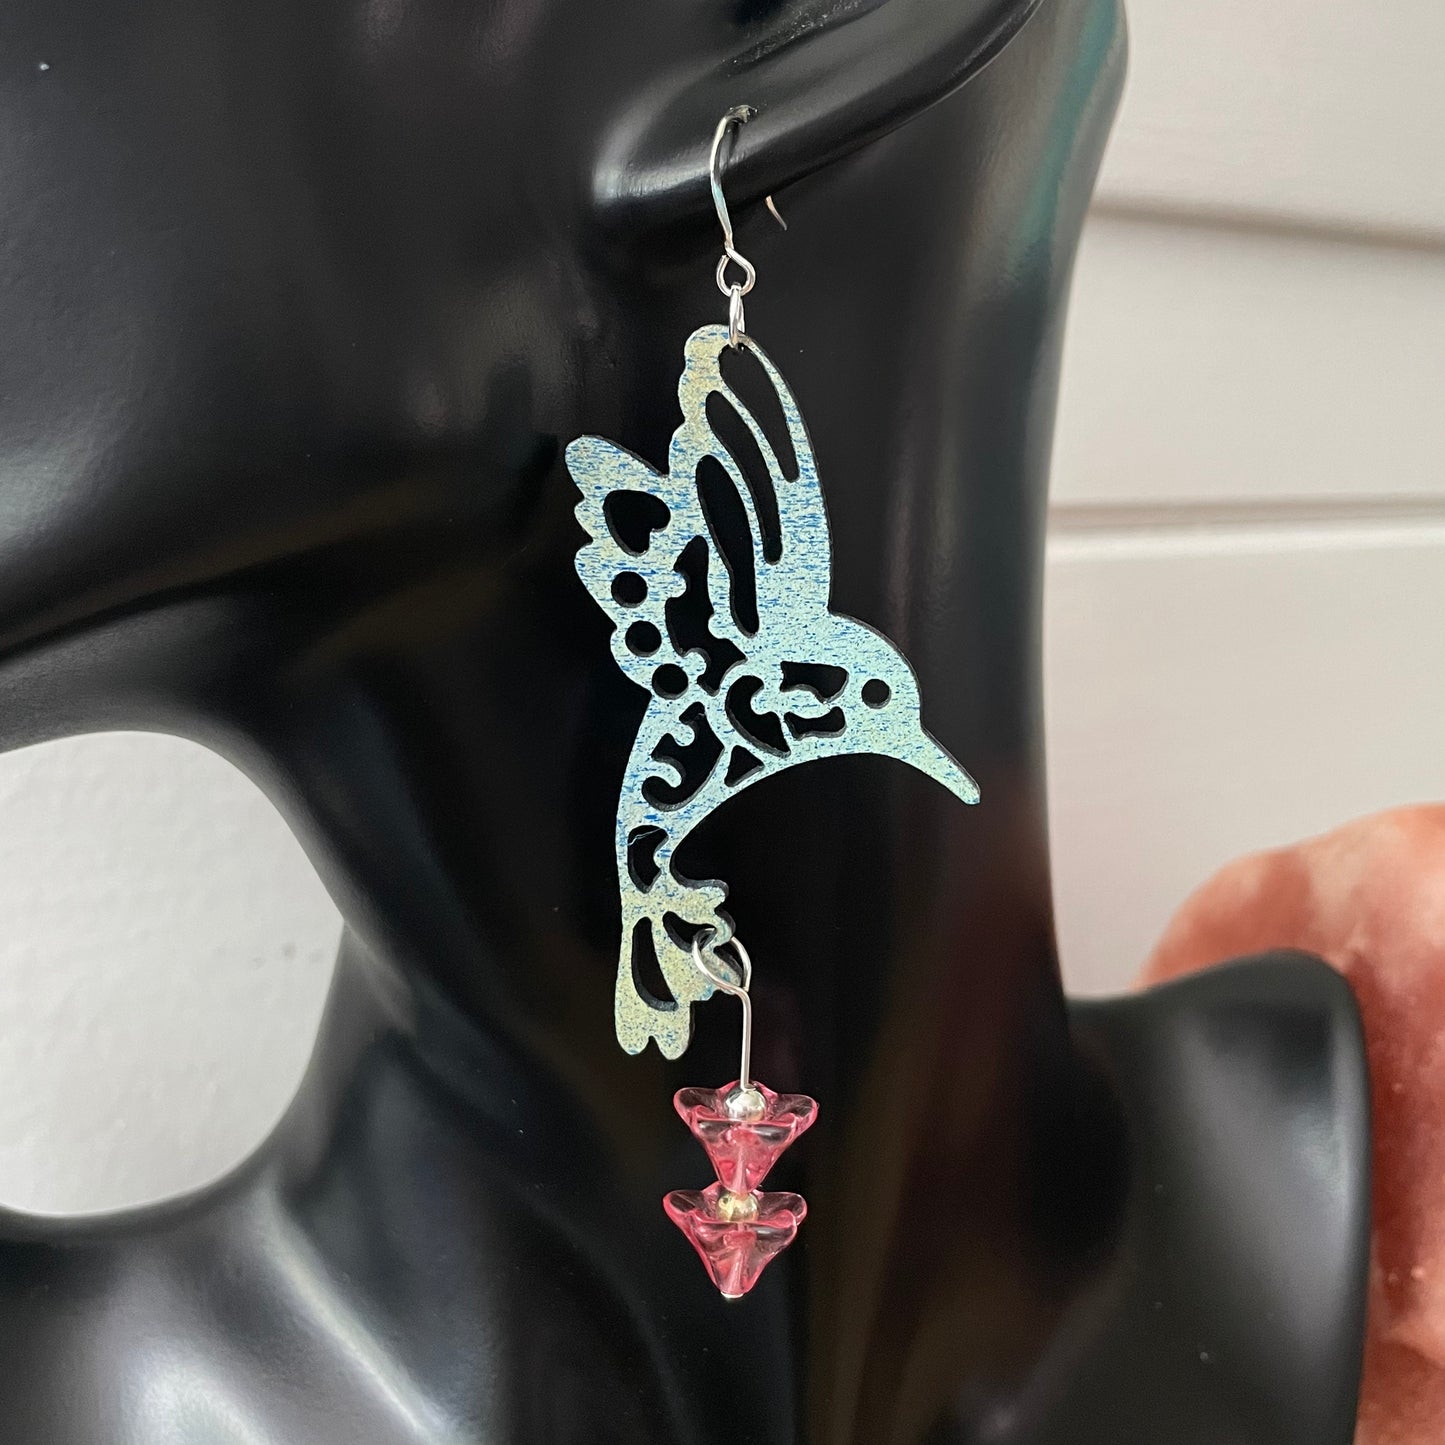 Hand Painted Hummingbird & Pink Glass Flower Statement Earrings 4" Multicolored Marbled Stamped Wood Blue Green